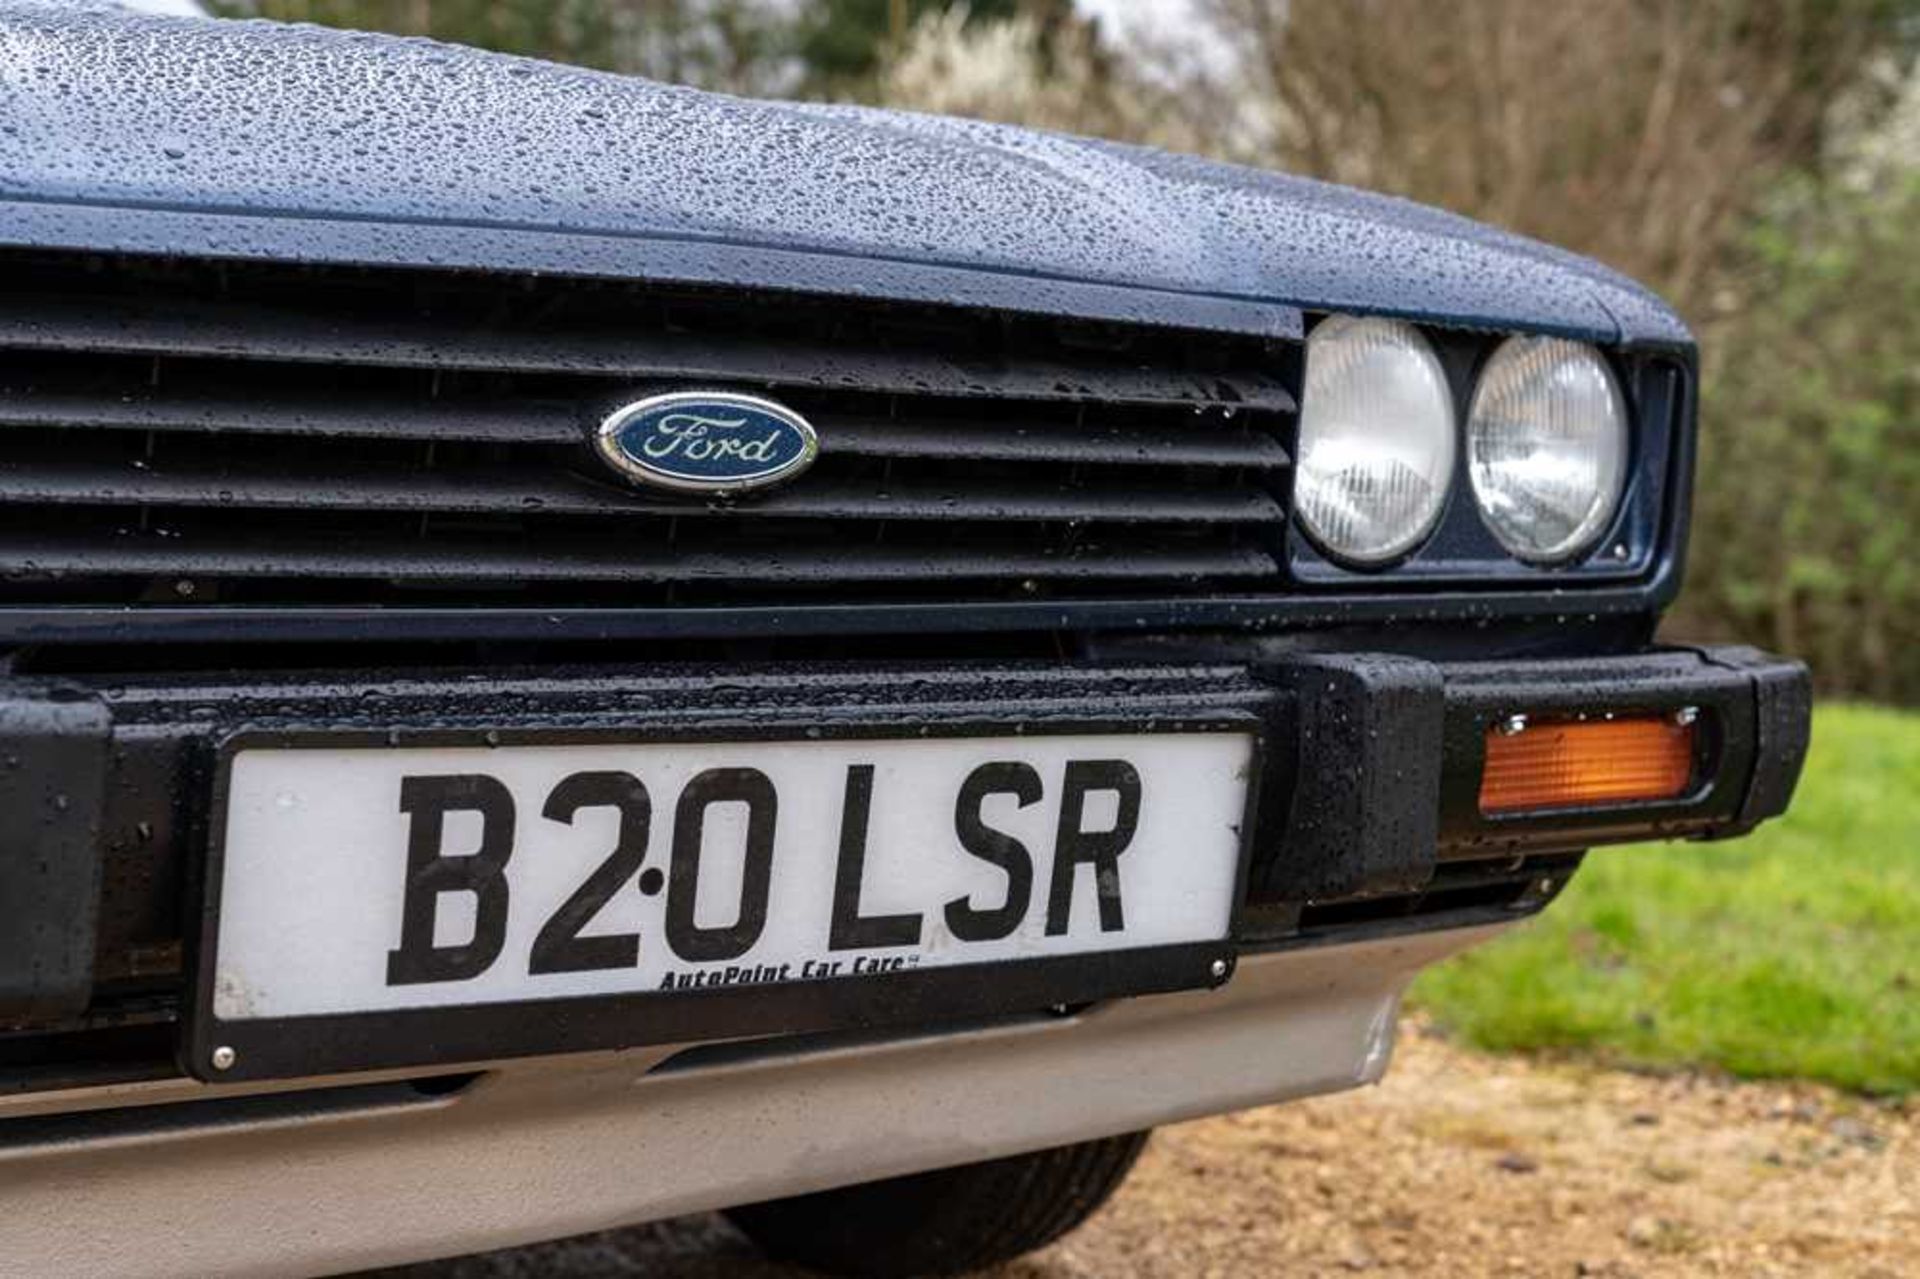 1985 Ford Capri Laser 2.0 Litre Warranted 55,300 miles from new - Image 16 of 67